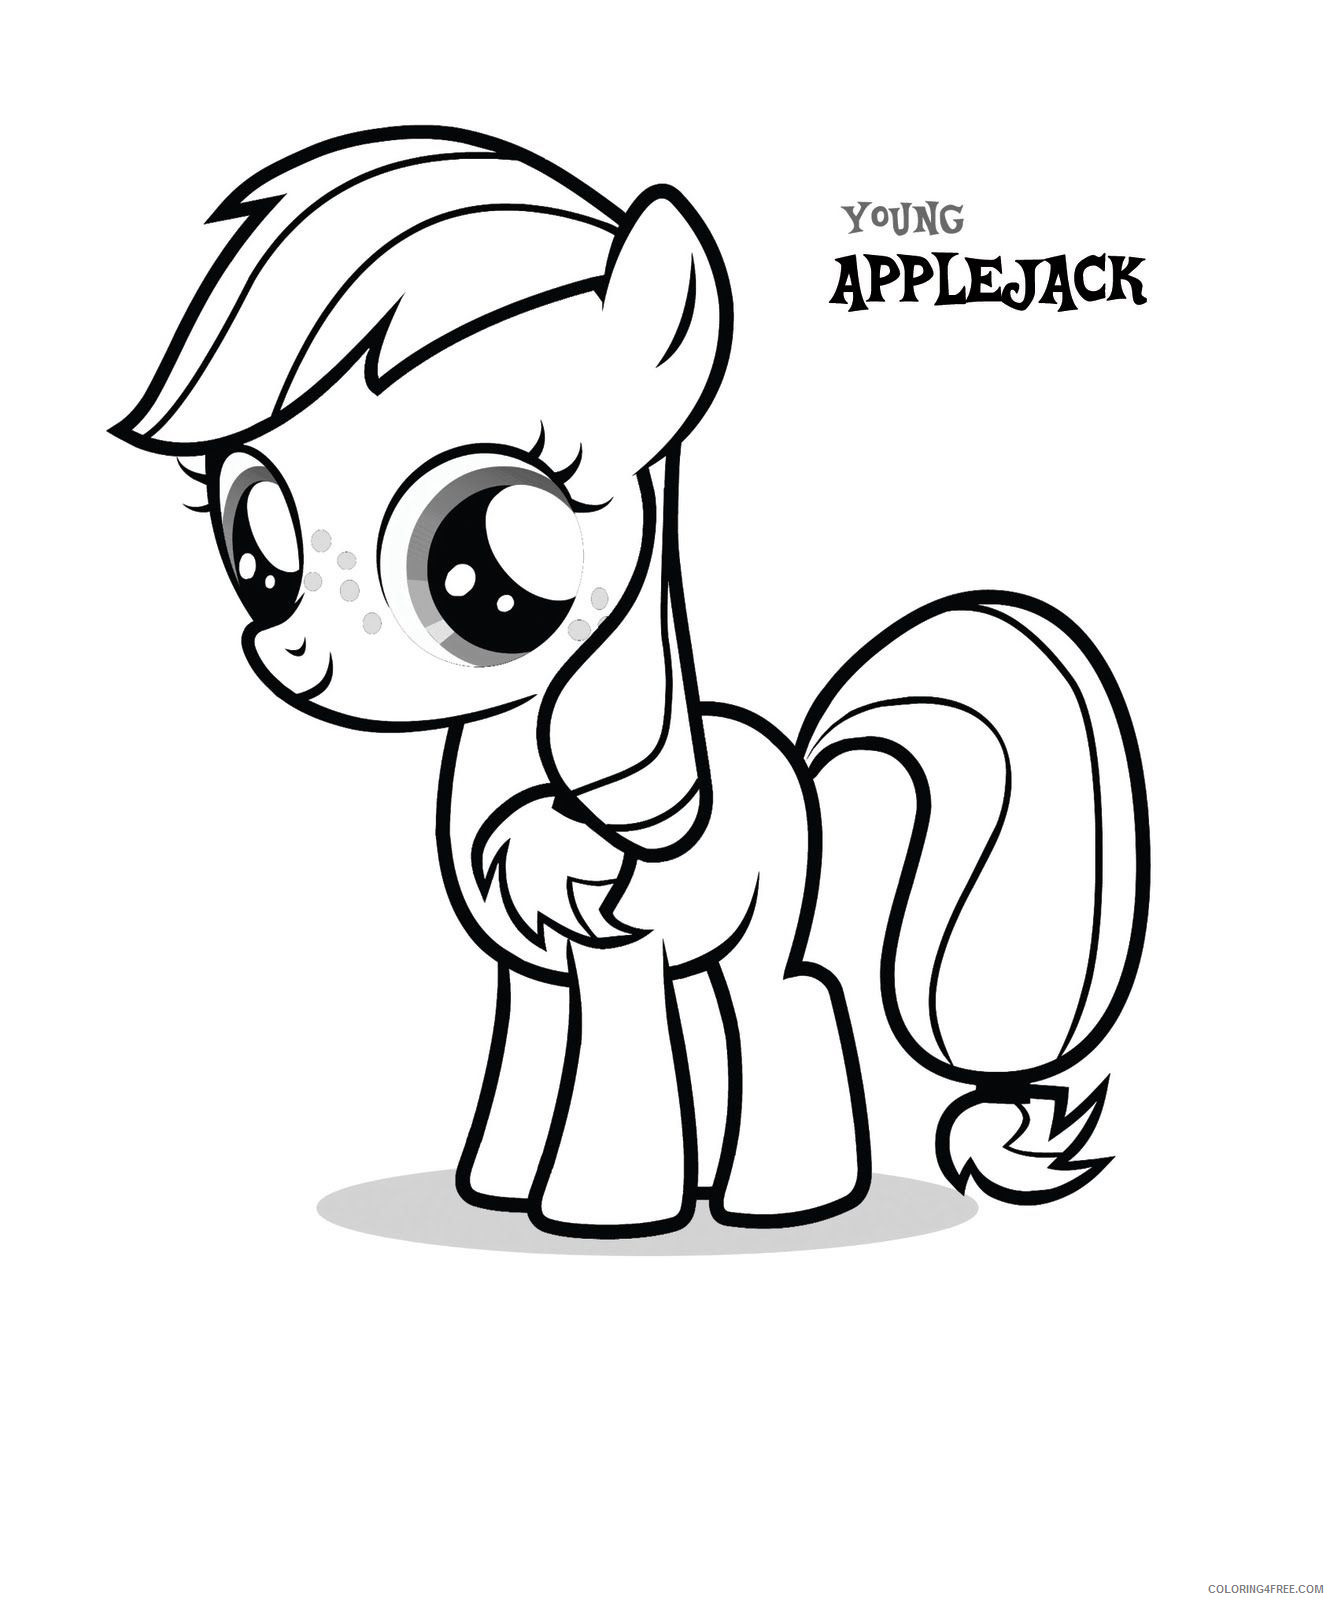 My Little Pony Coloring Pages Cartoons Young Applejack Printable 2020 4589 Coloring4free Coloring4free Com